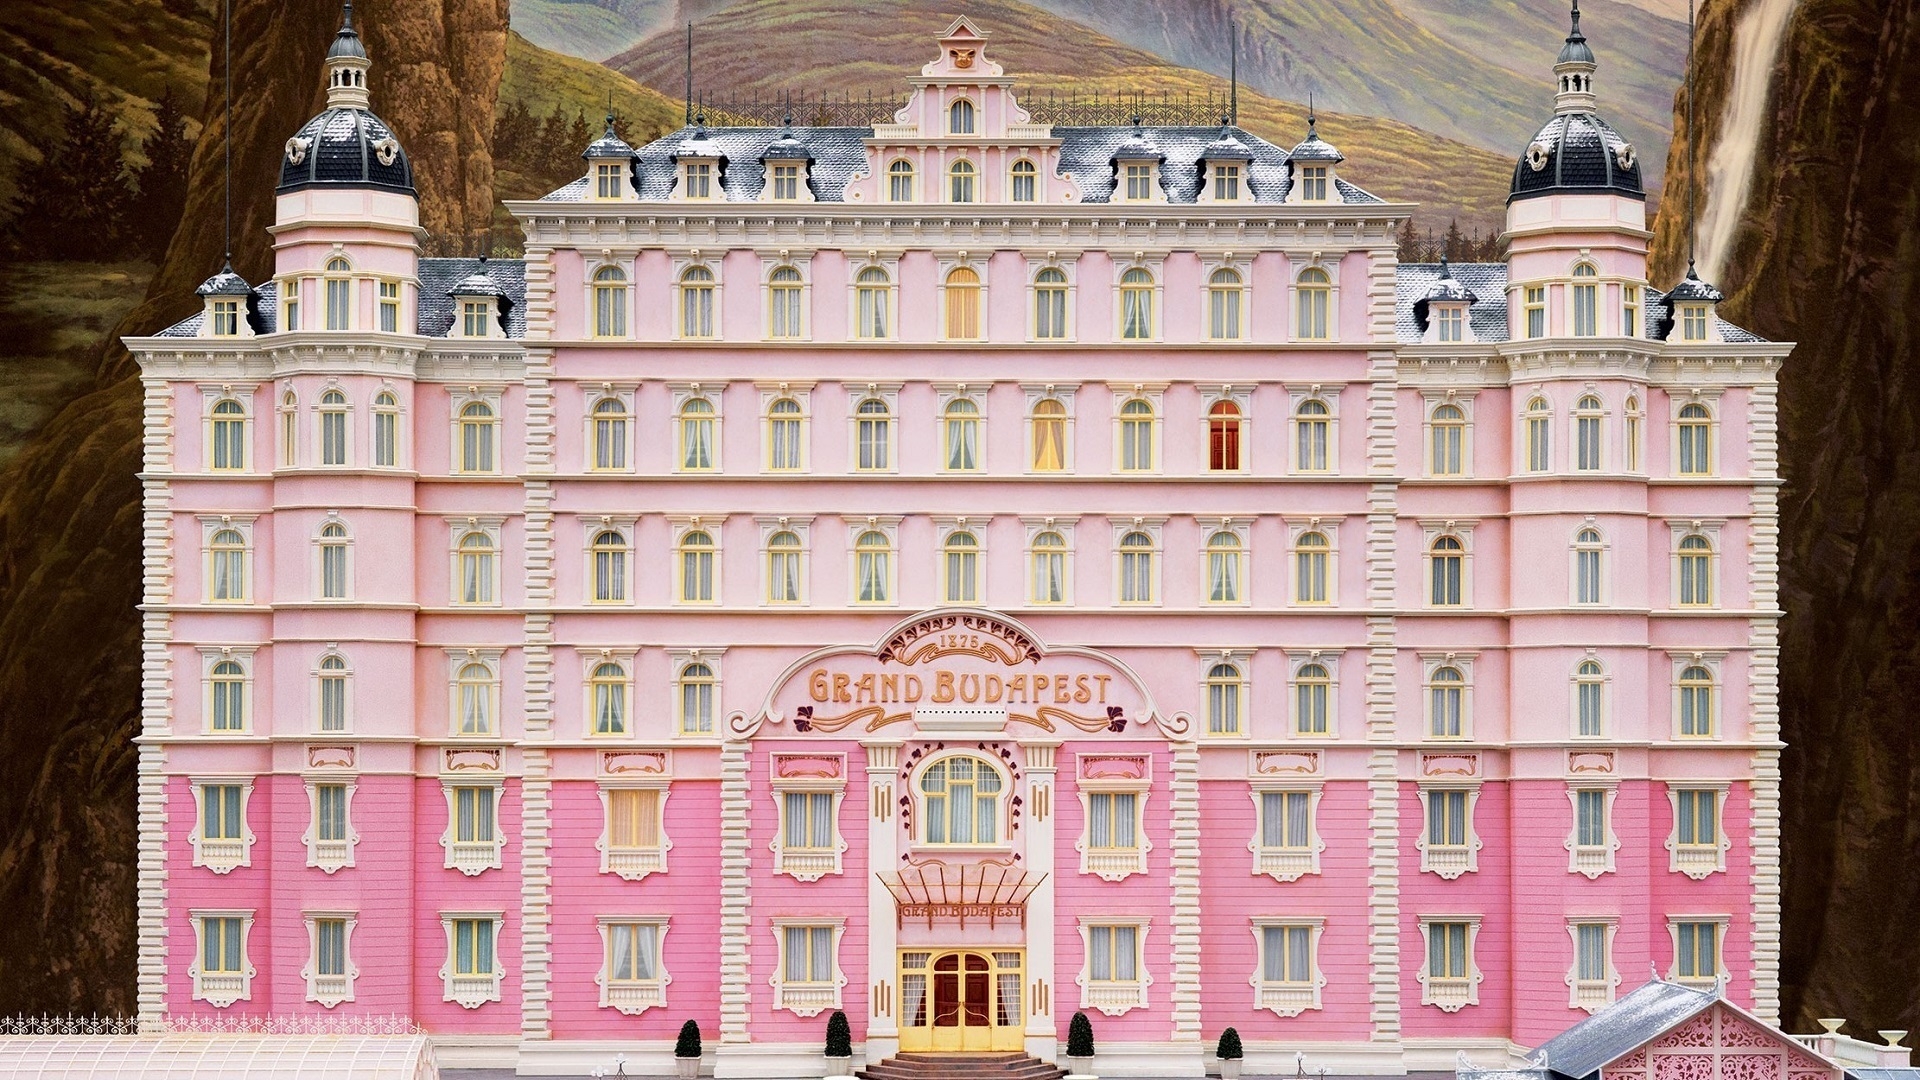 Download 1920x1080 The Grand Budapest Hotel, Building Wallpaper for Widescreen